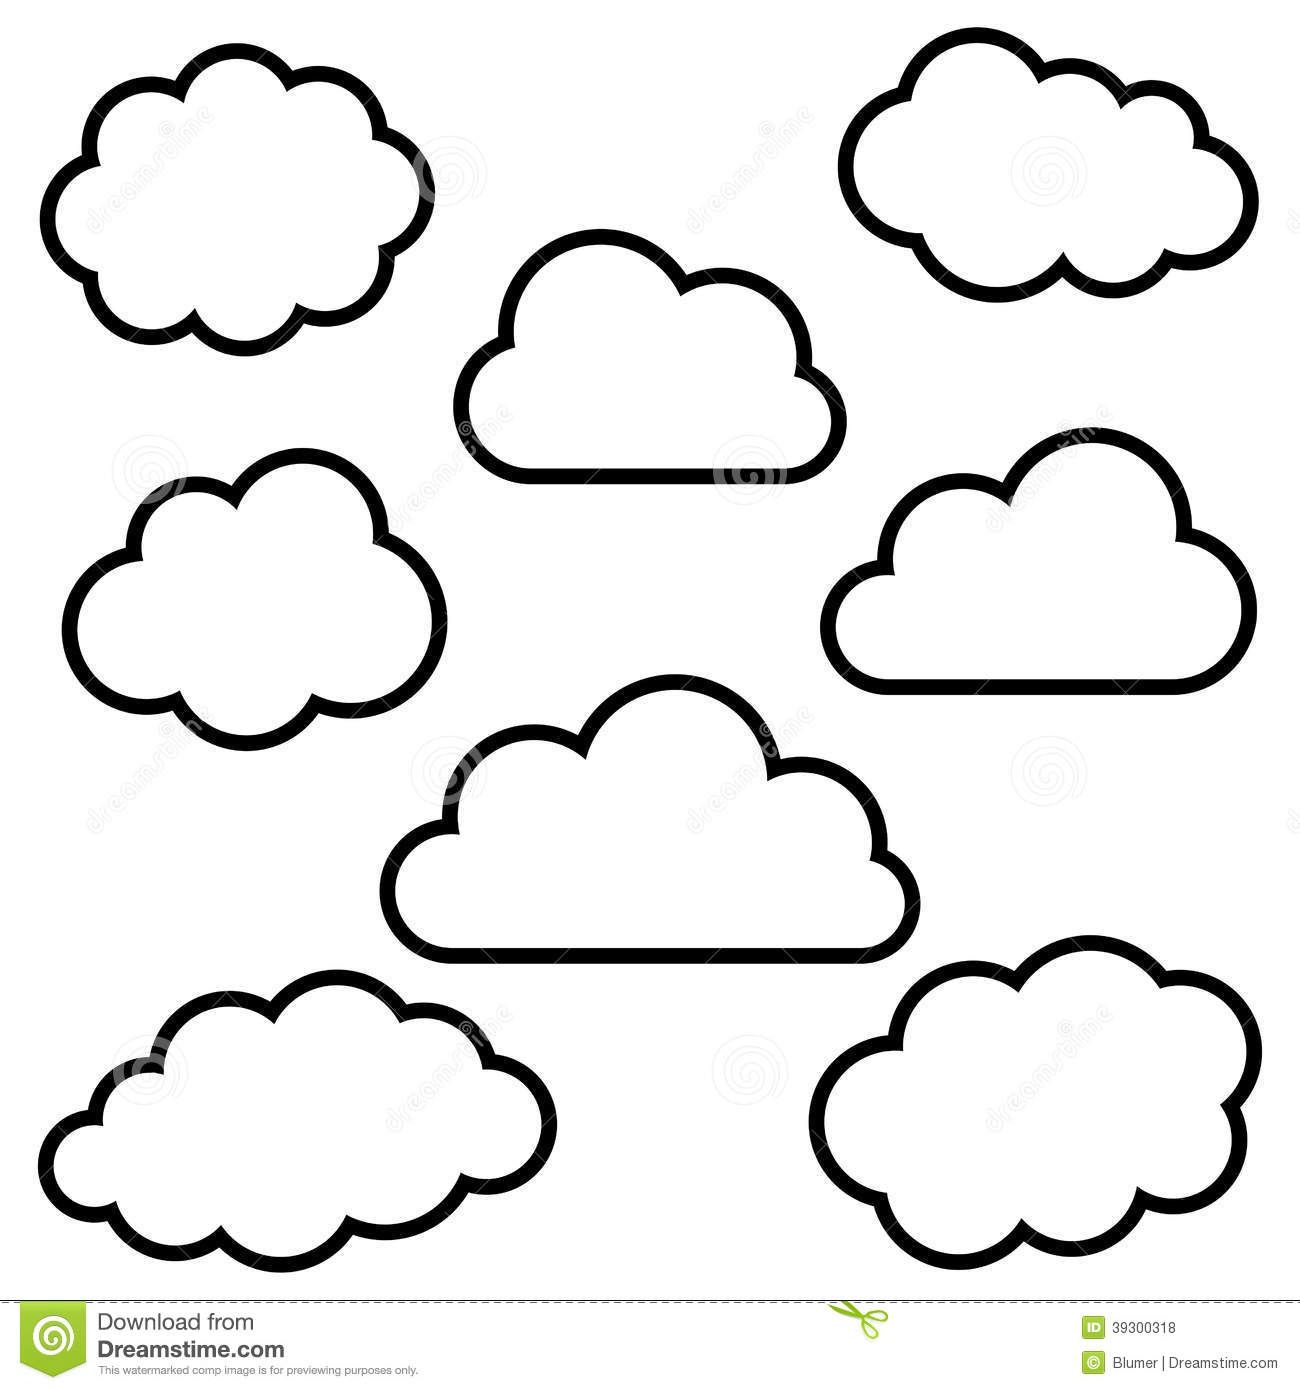 Clouds background stock.